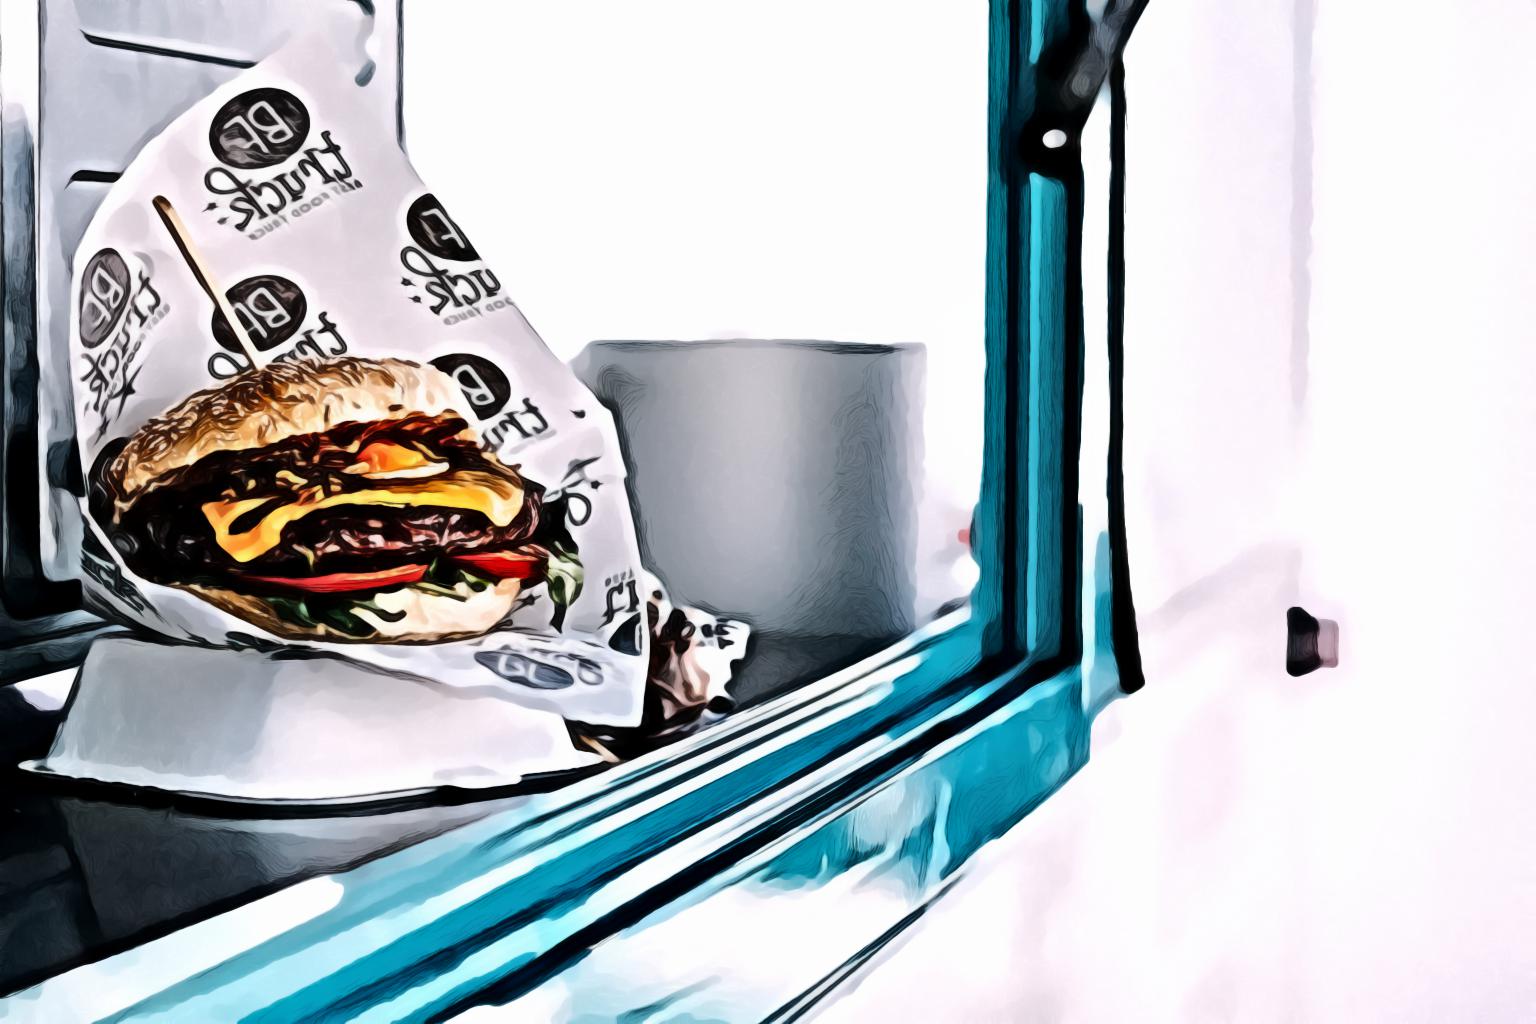 Cooked Burger In The Window